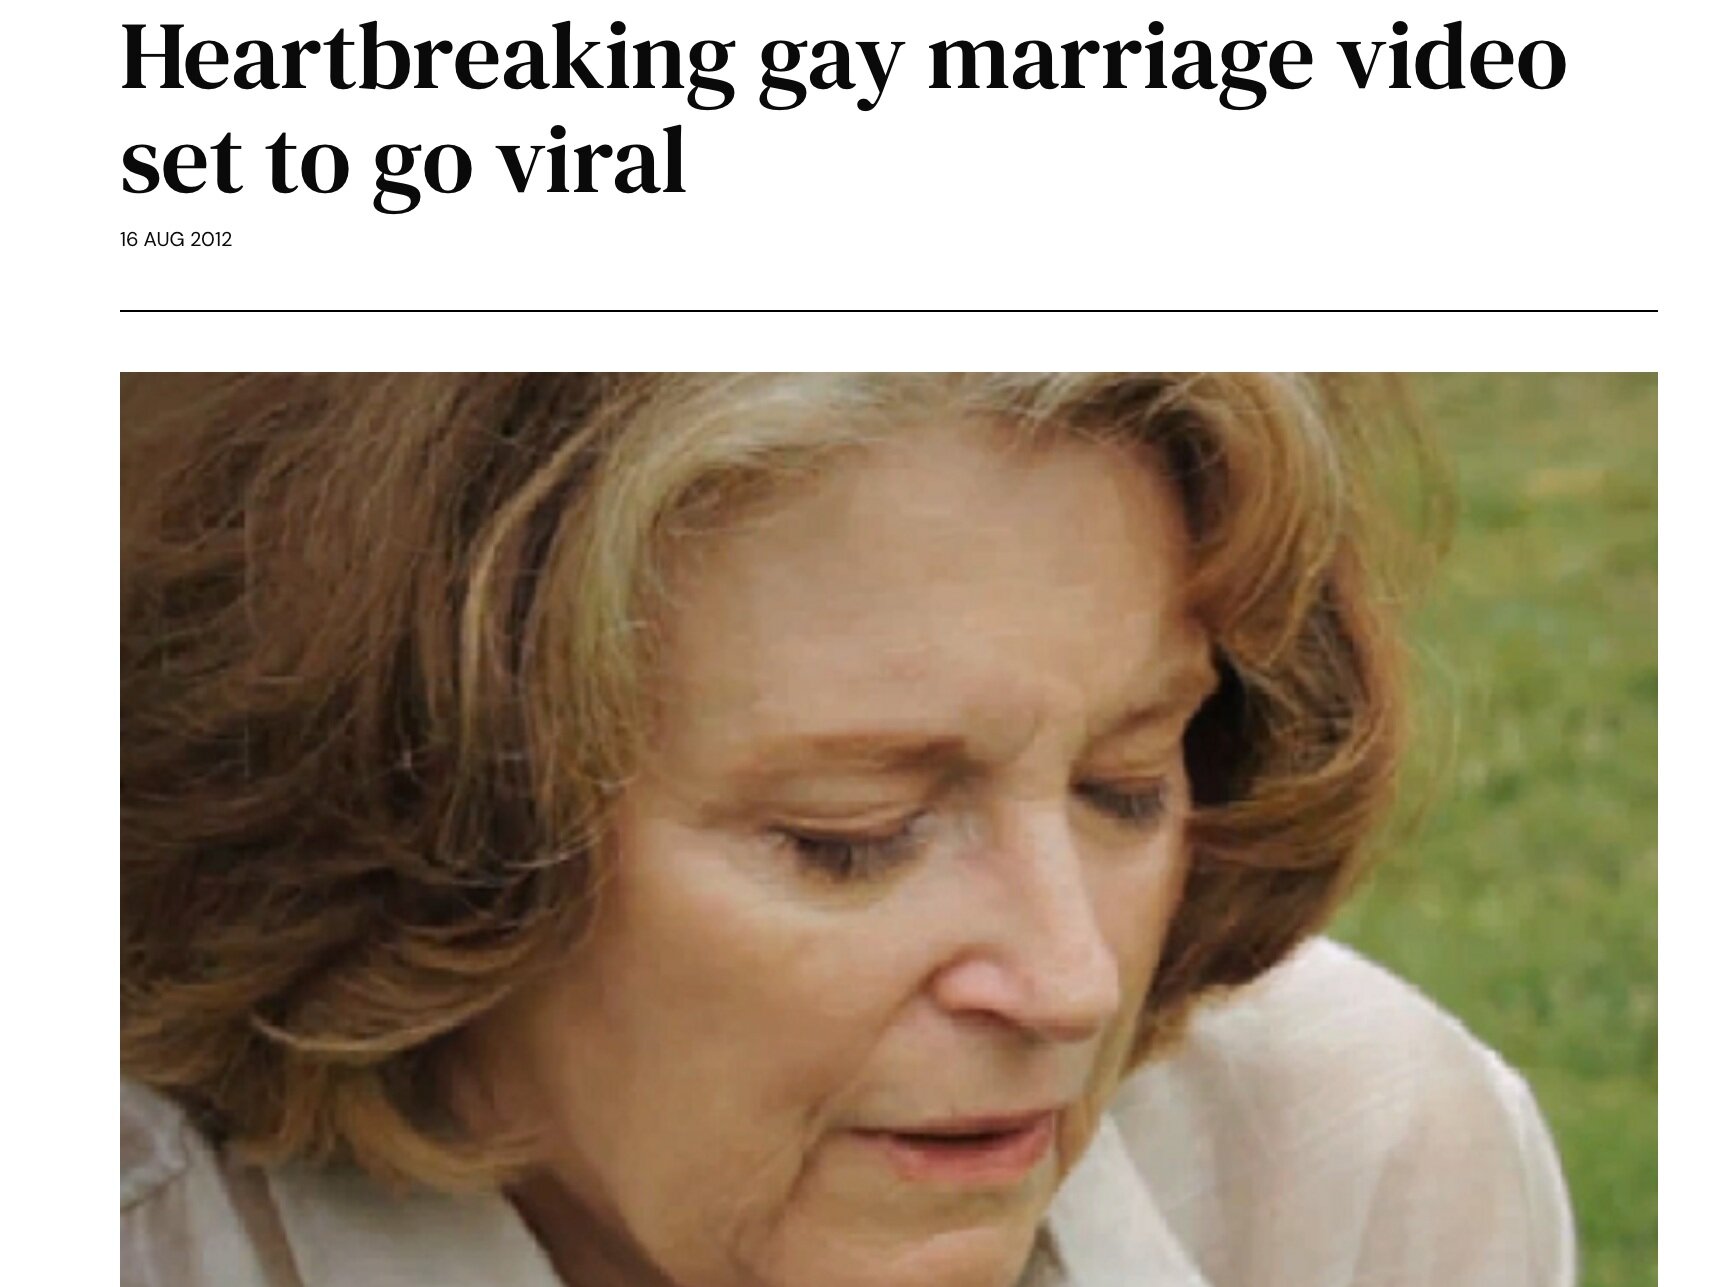 GAY STAR NEWS: Heartbreaking gay marriage video set to go viral